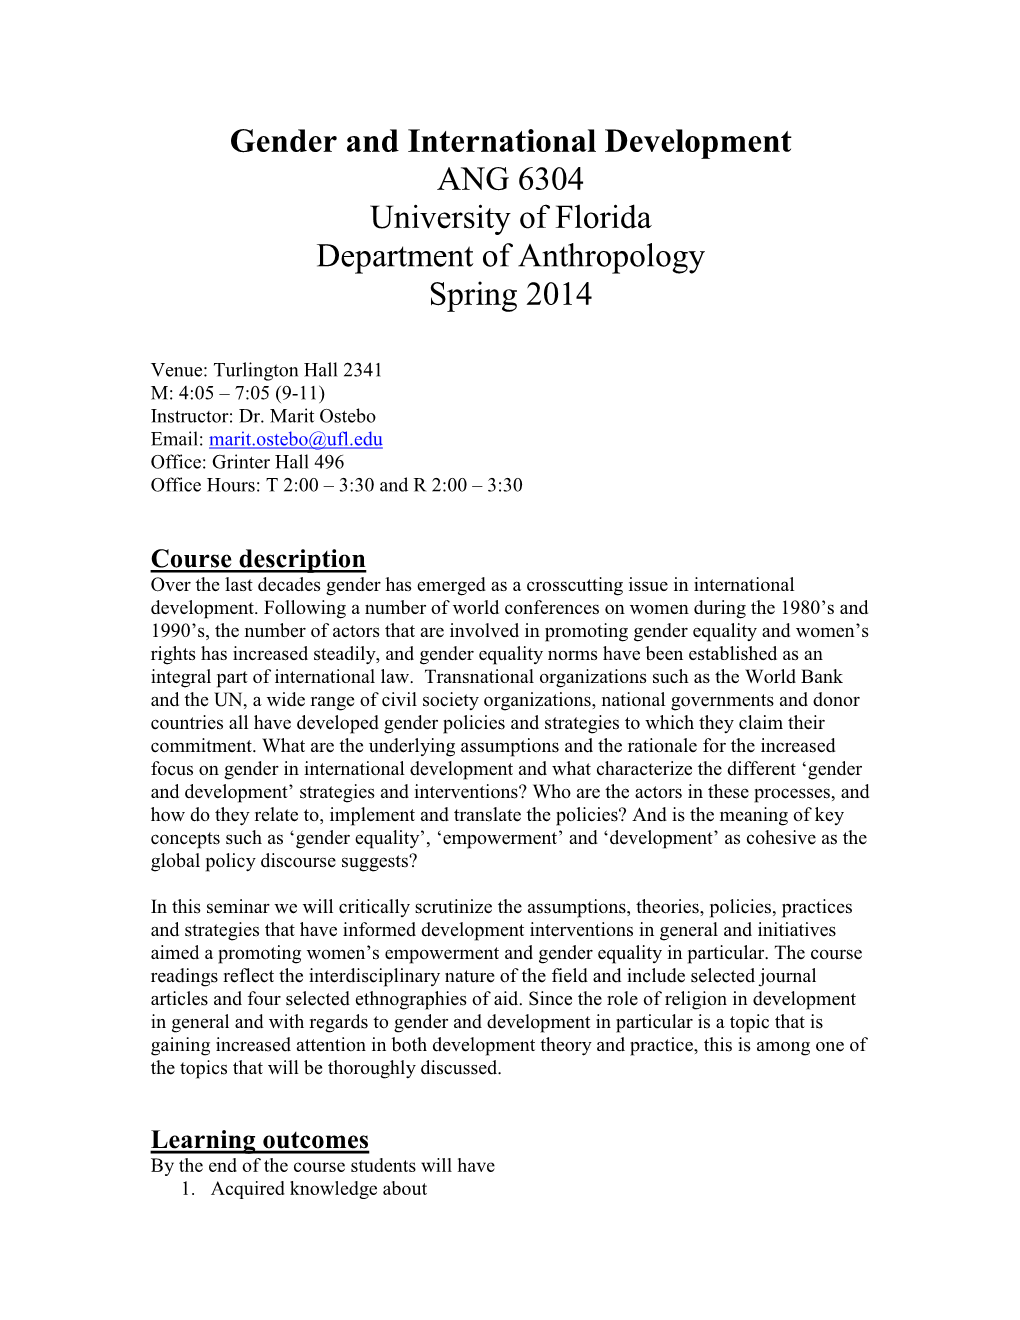 Gender and International Development ANG 6304 University of Florida Department of Anthropology Spring 2014